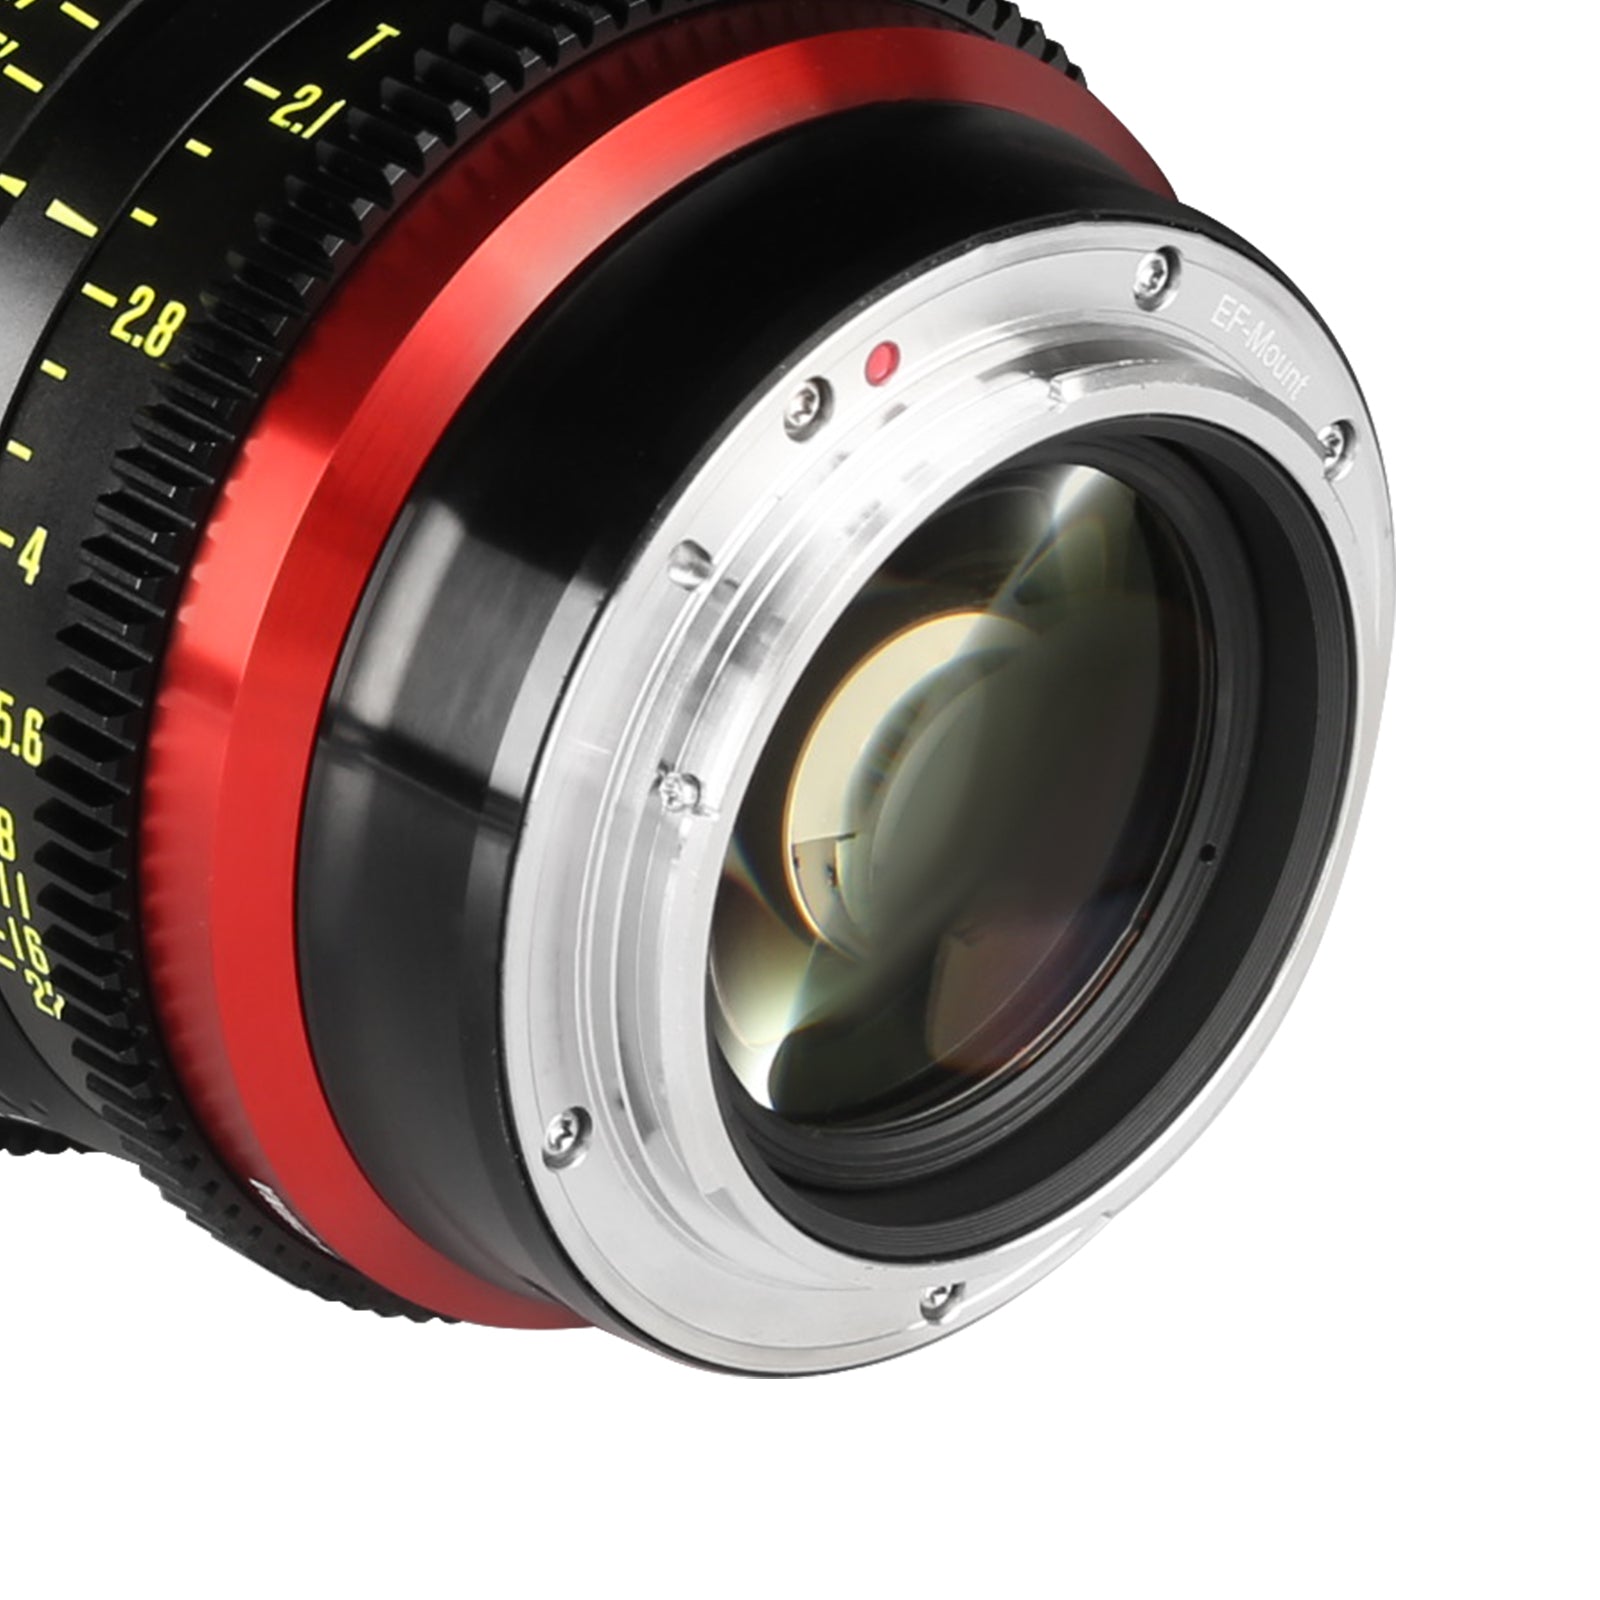 Meike Cinema Full Frame Cinema Prime 85mm T2.1 Lens (Canon RF Mount in a Close-Up View)